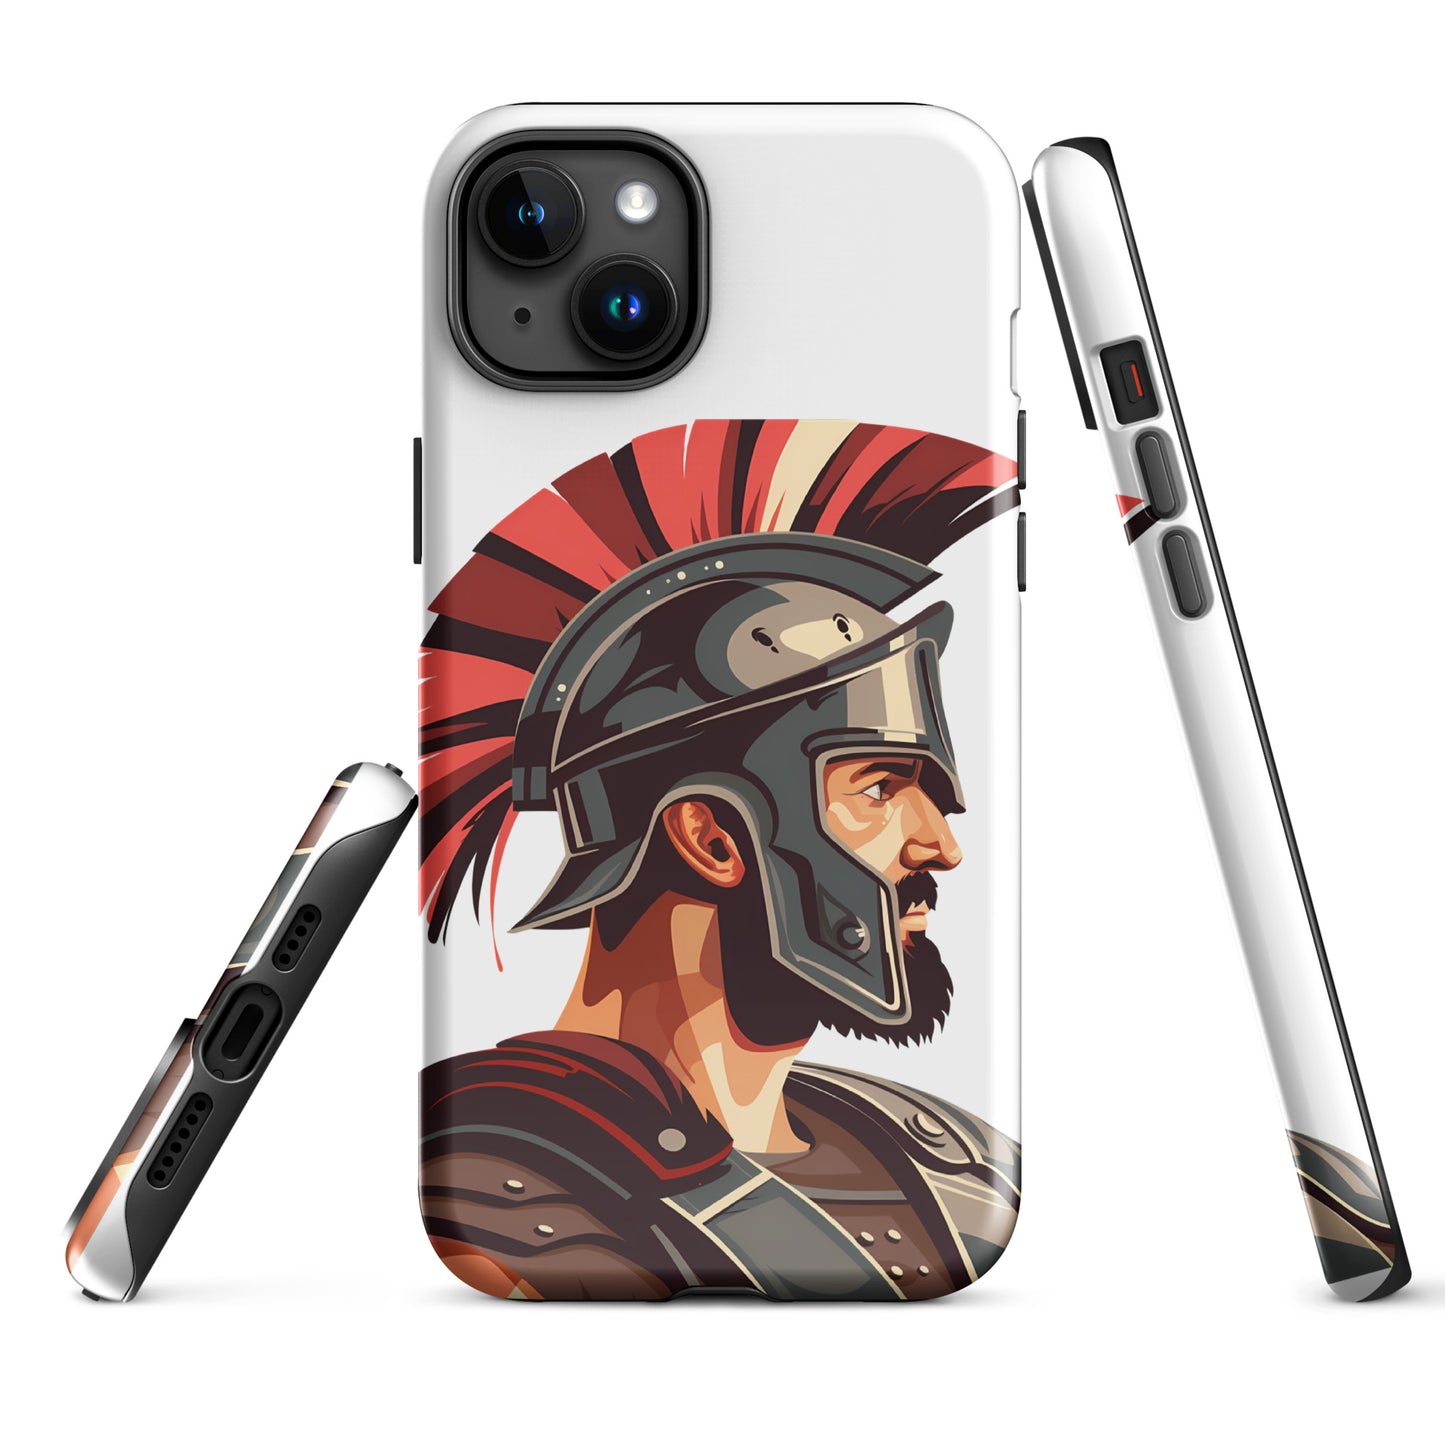 Glossy Tough Case for Iphone with a print of a warrior